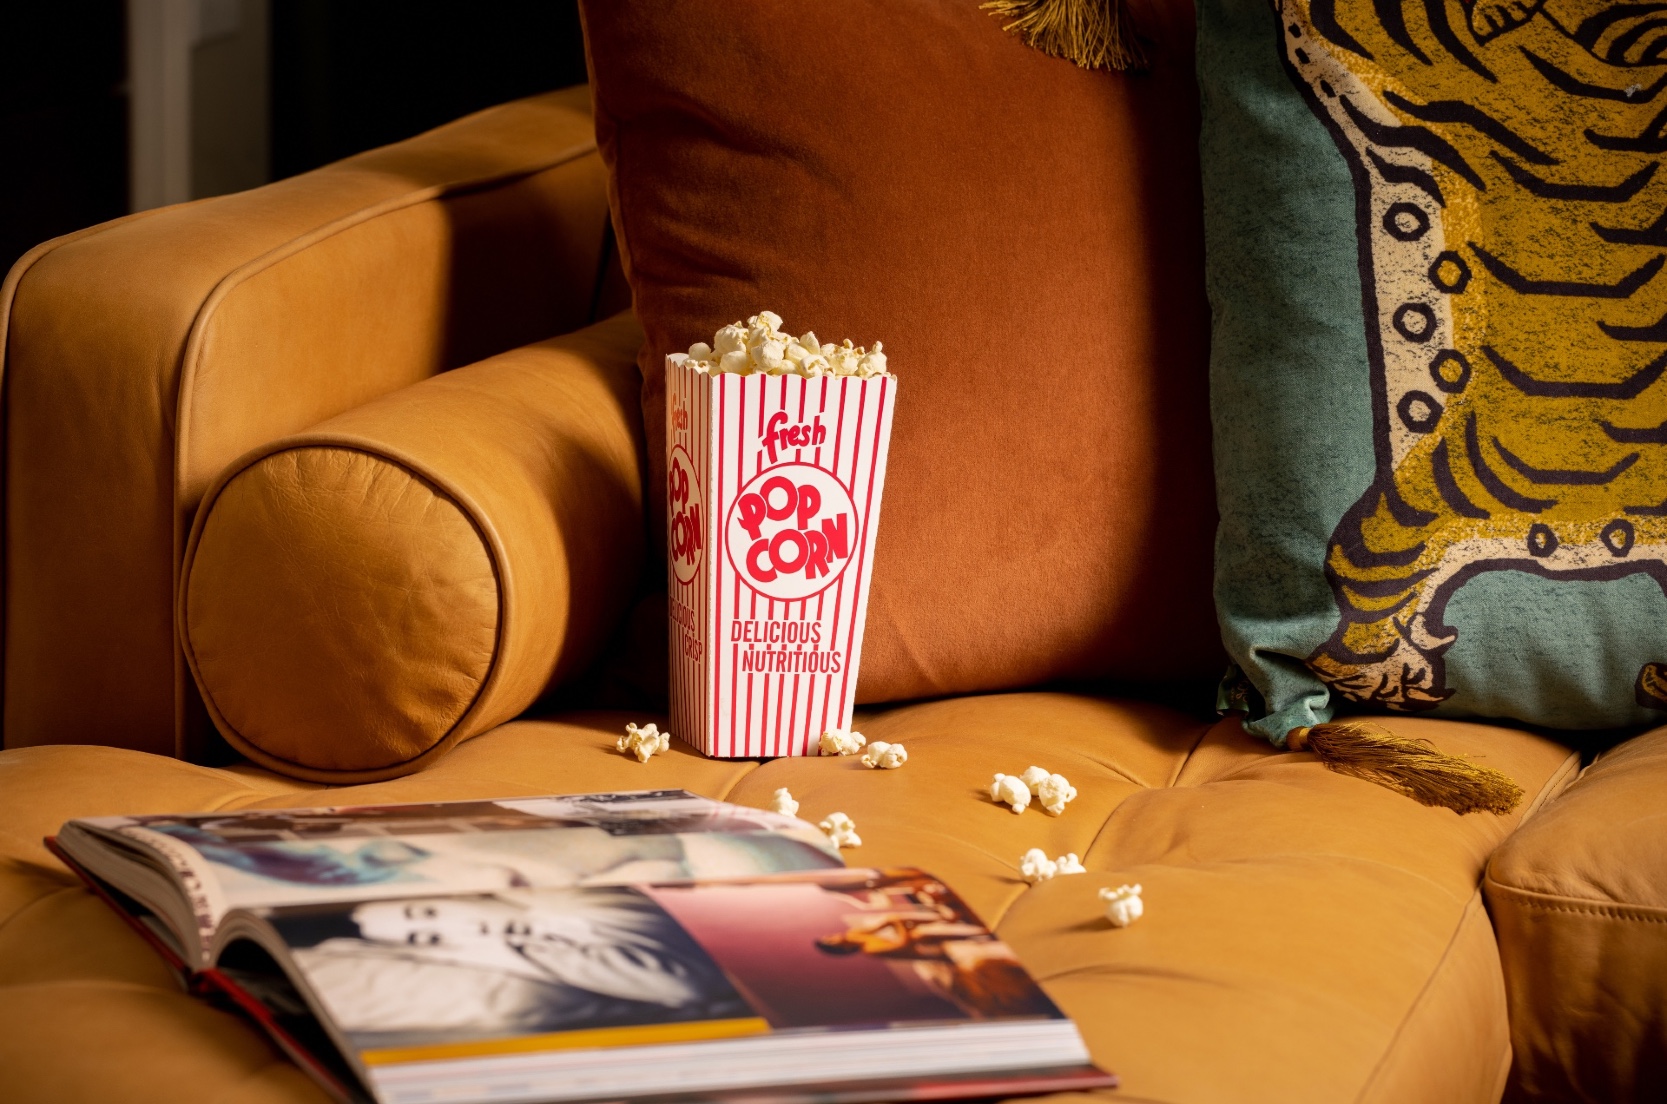 Popcorn and open book on a brown couch.